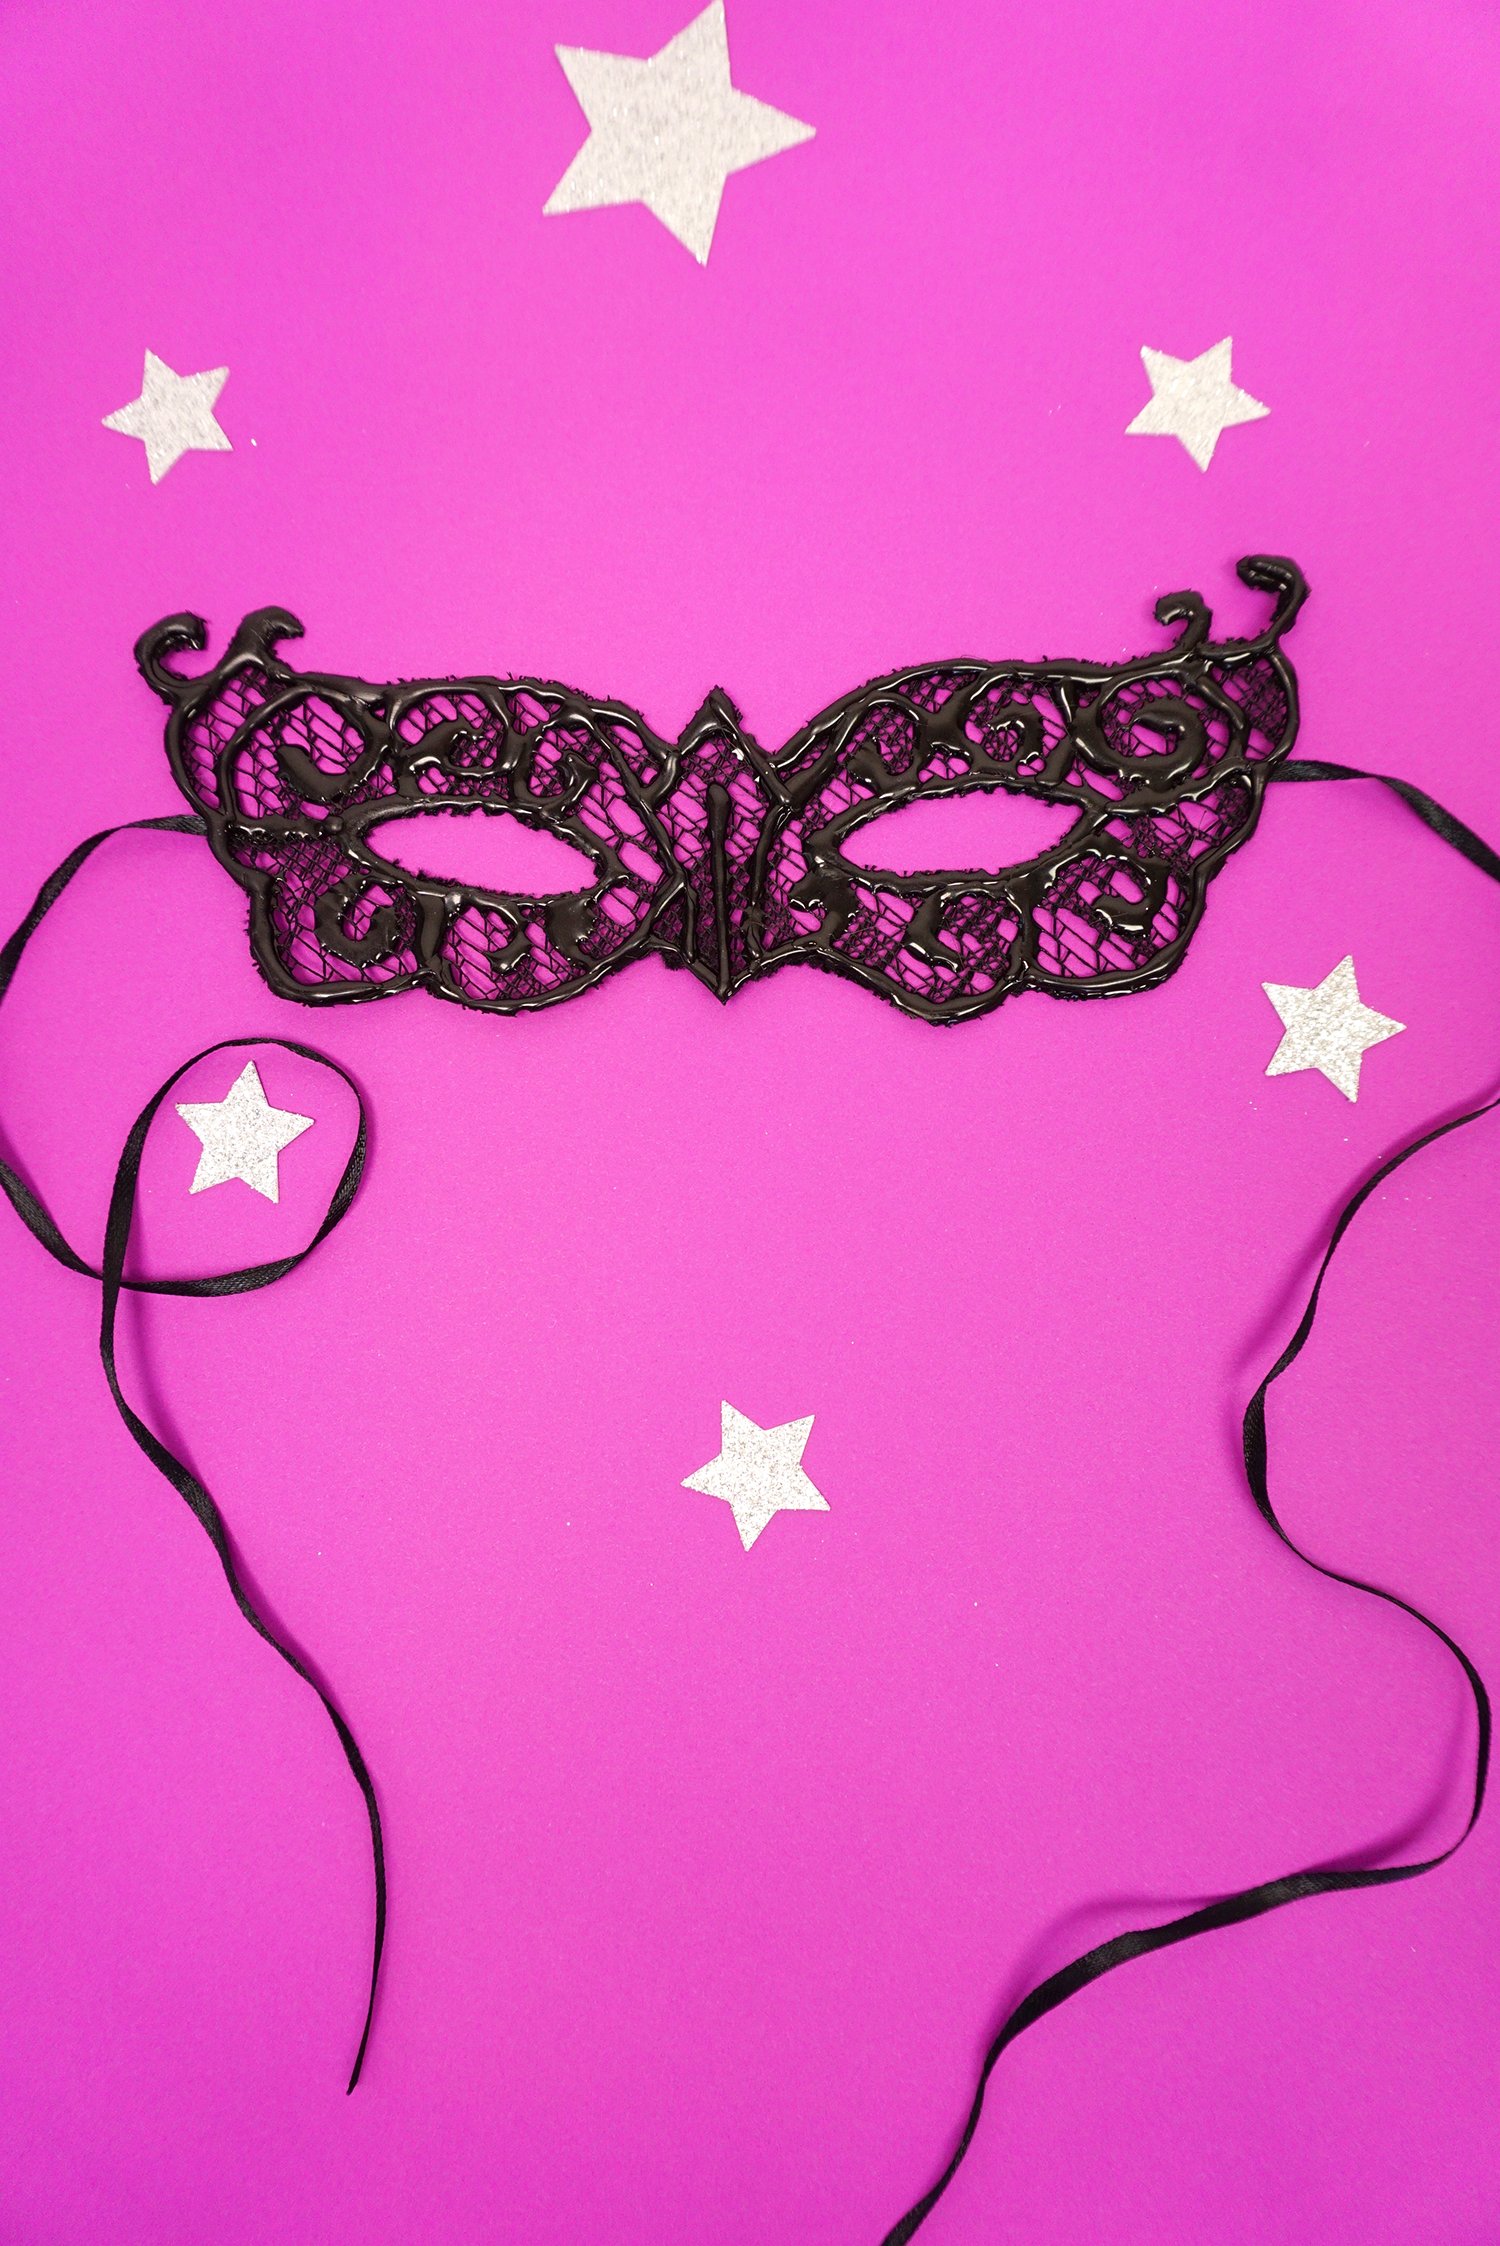 Easy DIY Lace Masquerade Mask from Hot Glue